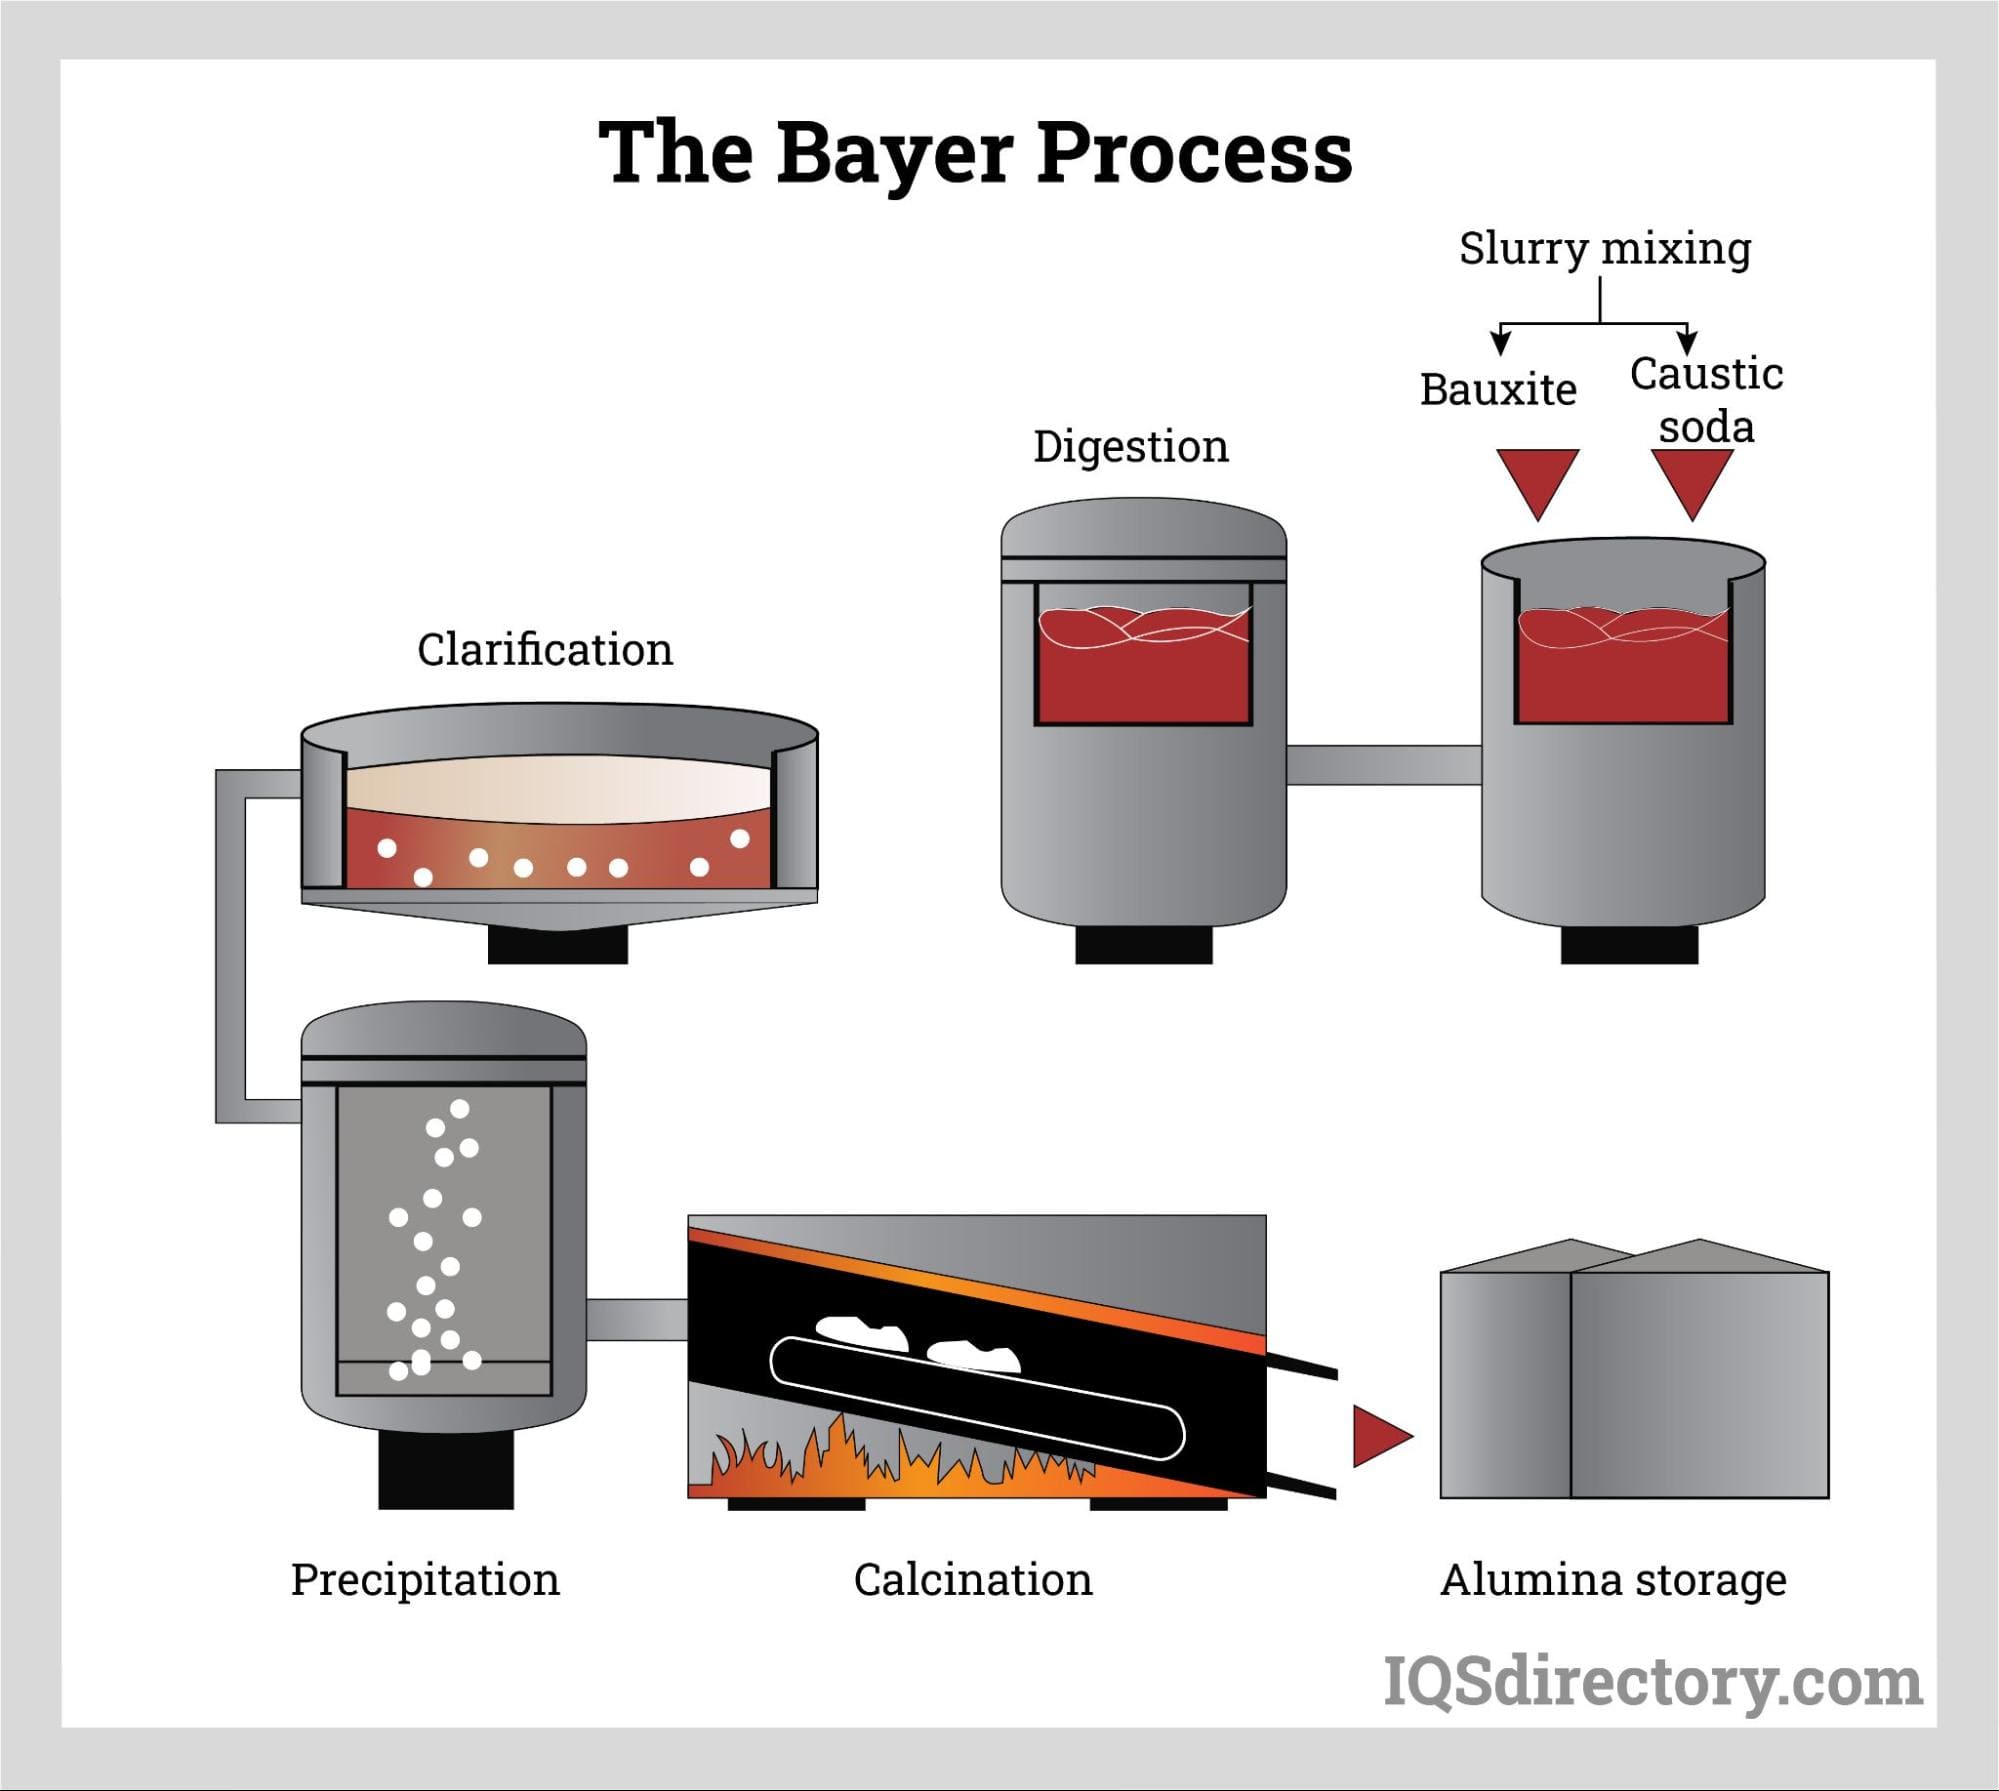 The Bayer Process